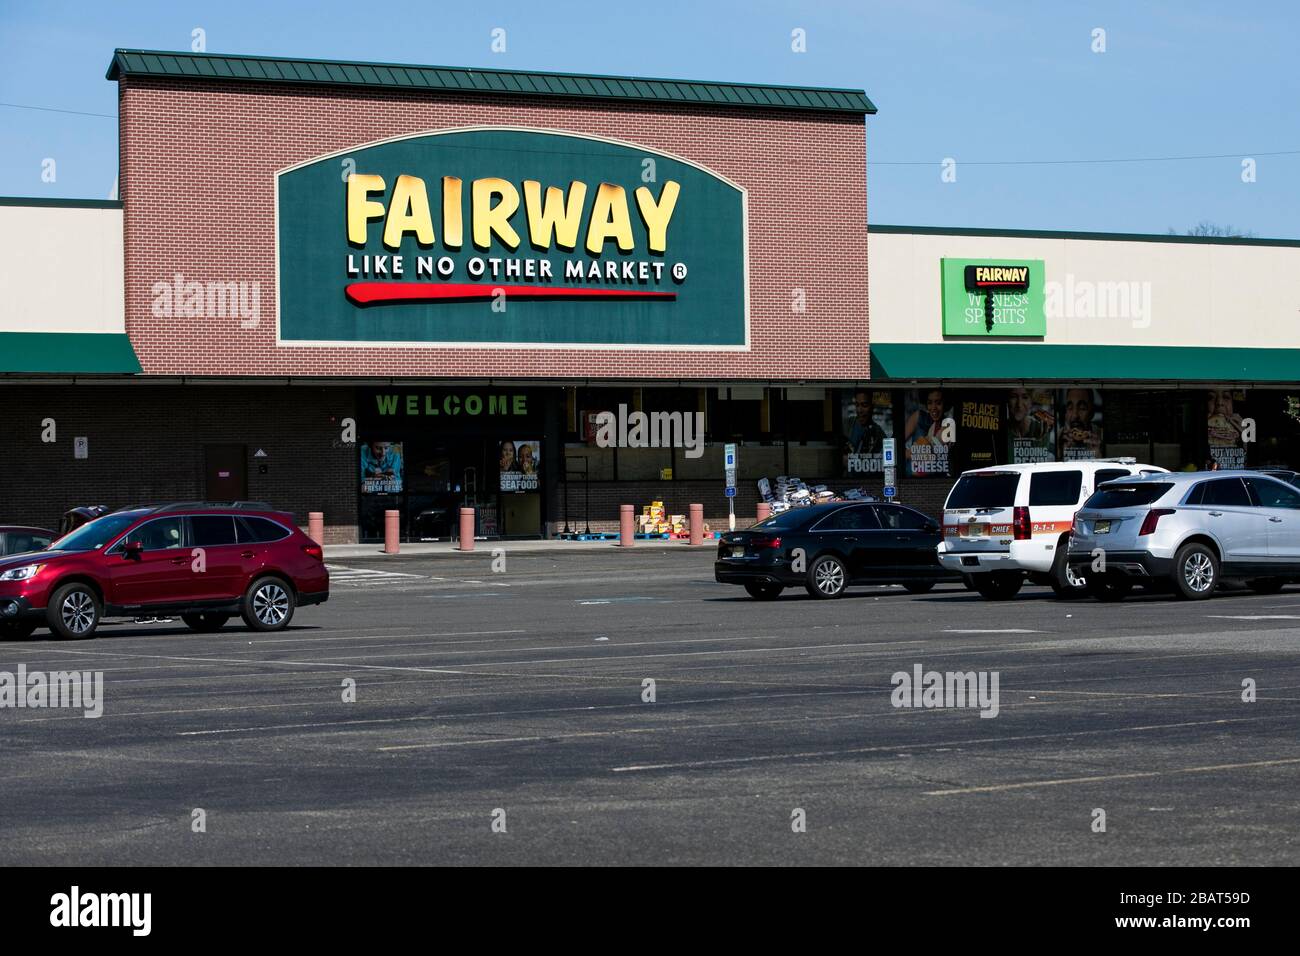 A logo sign outside of a Fairway Market retail grocery store location in Woodland Park, New Jersey, on March 23, 2020. Stock Photo